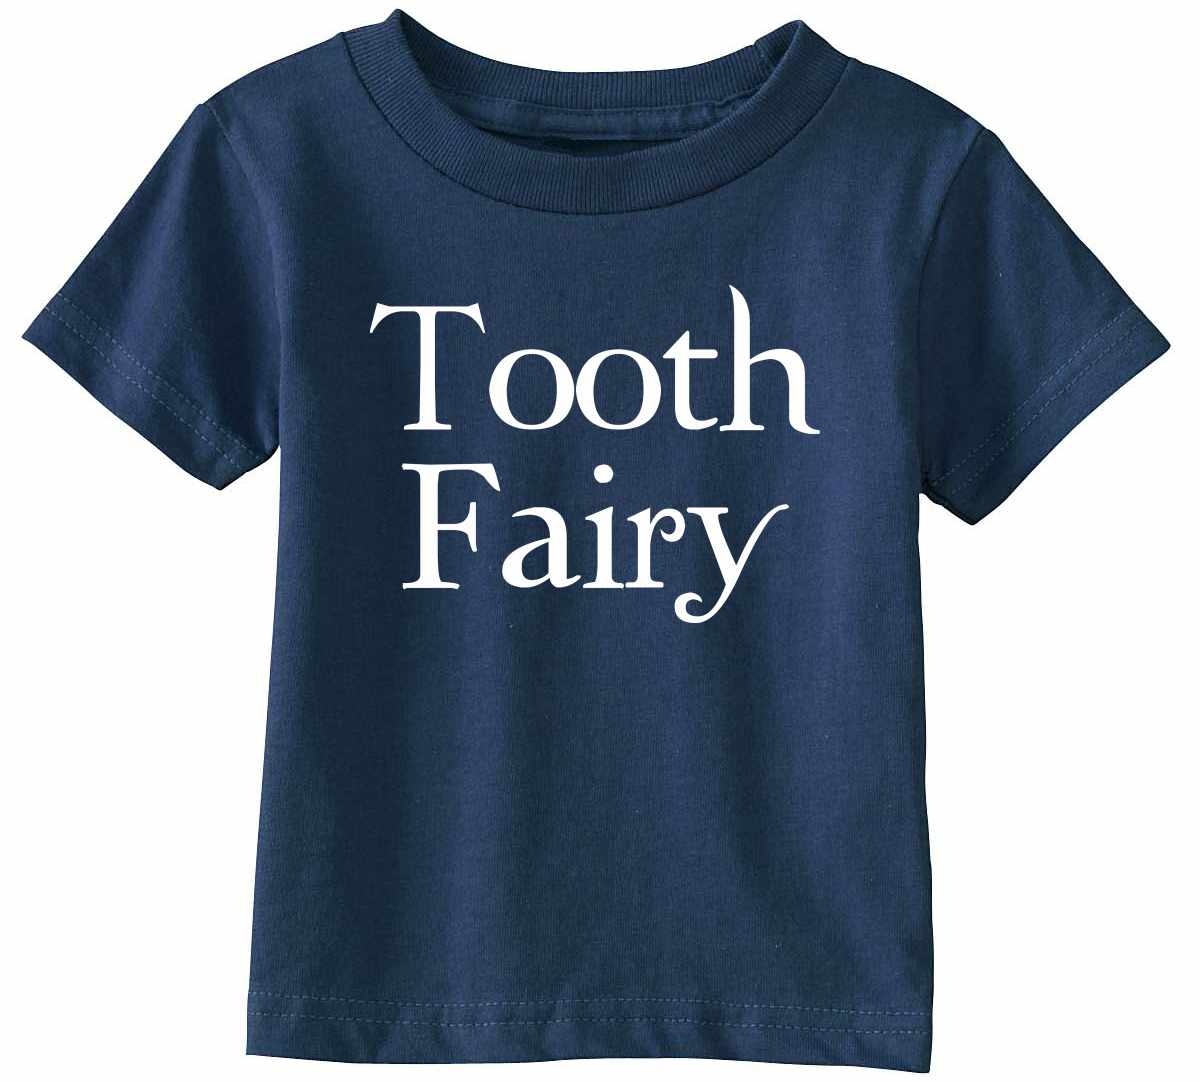 Tooth Fairy on Infant-Toddler T-Shirt